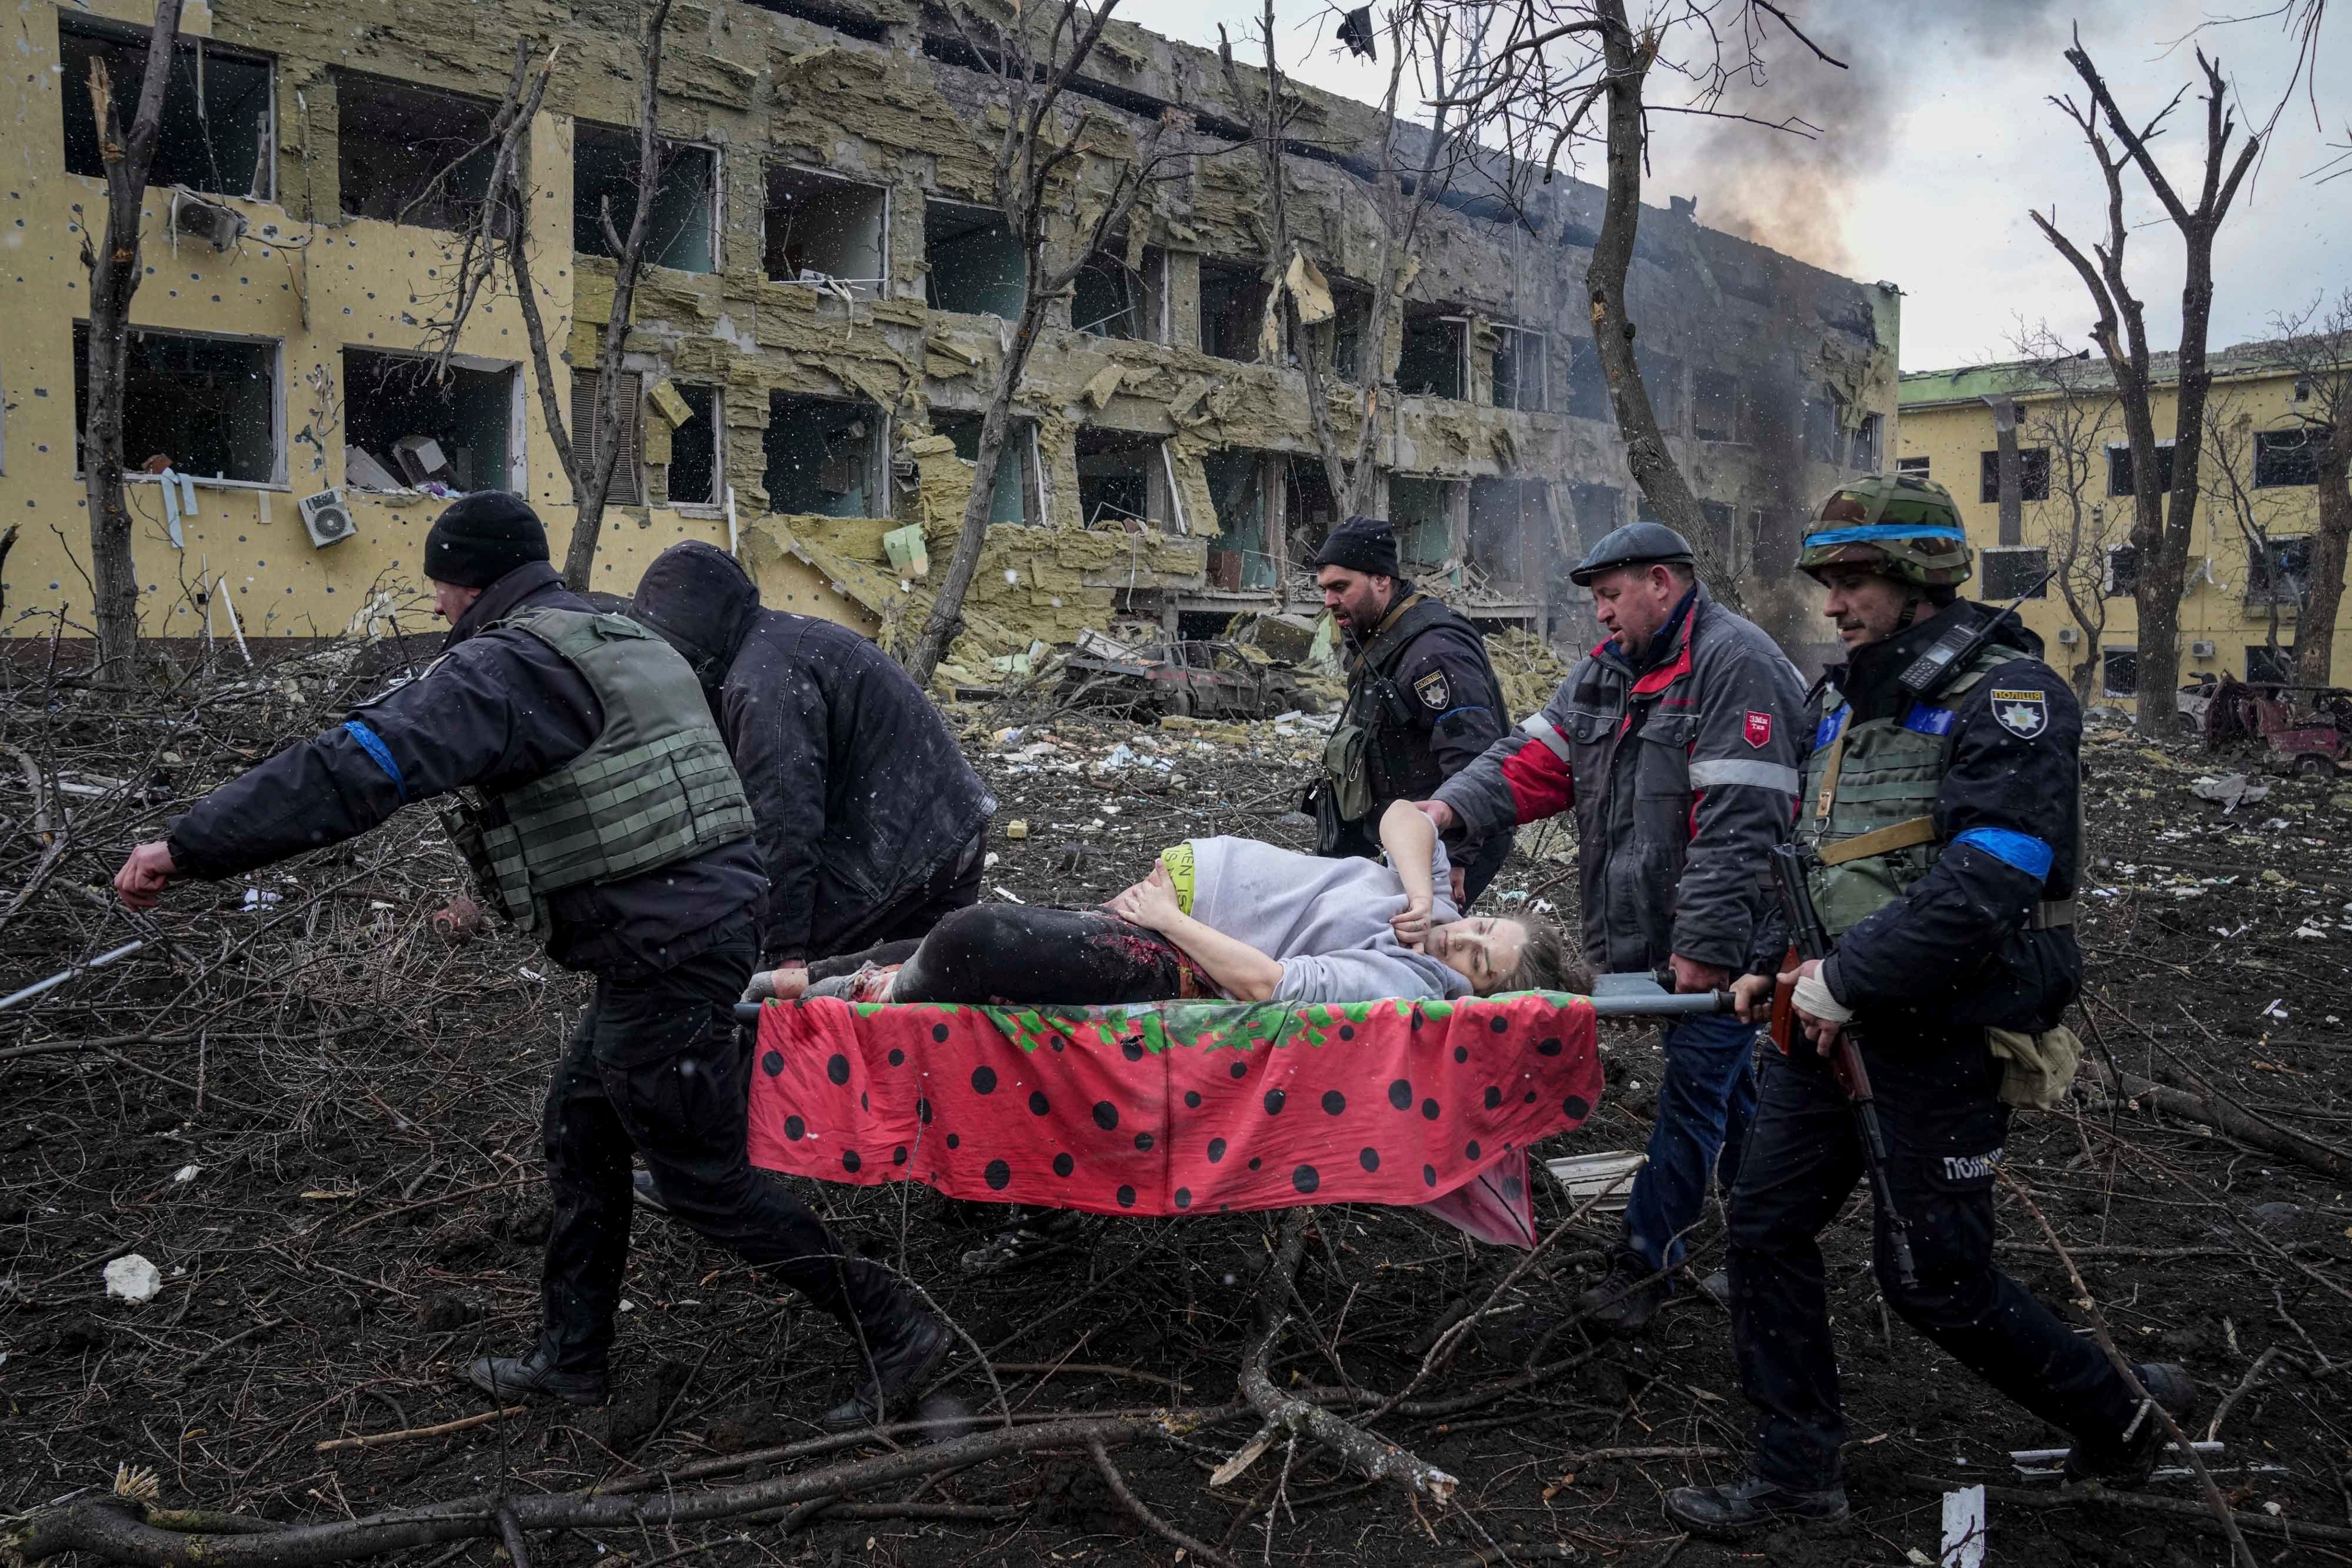 Ukrainian emergency employees and volunteers carry an injured pregnant woman from a maternity hospital that was damaged by shelling in Mariupol, Ukraine, March 9, 2022. The woman and her baby died after Russia bombed the maternity hospital where she was meant to give birth. (Evgeniy Maloletka—AP Photo)